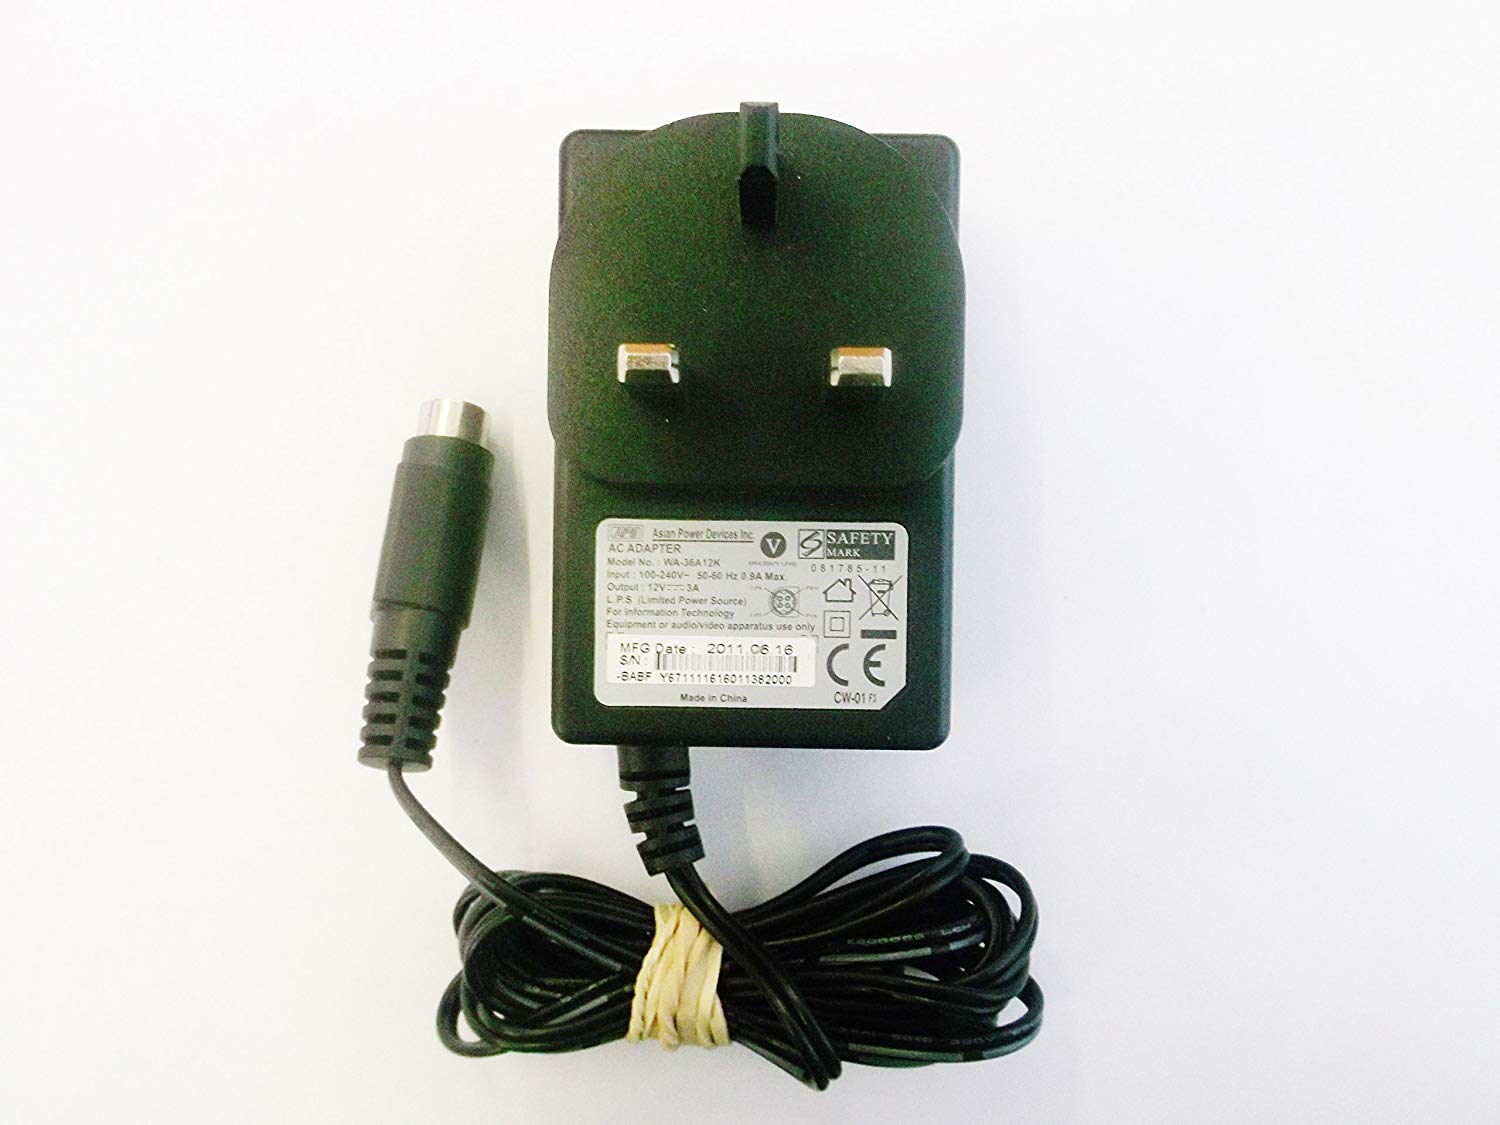 New 12V 3A Power Adapter for APD WA-36A12K TV AC ADAPTER 4 pin New 12V 3A Power Adapter for APD WA-